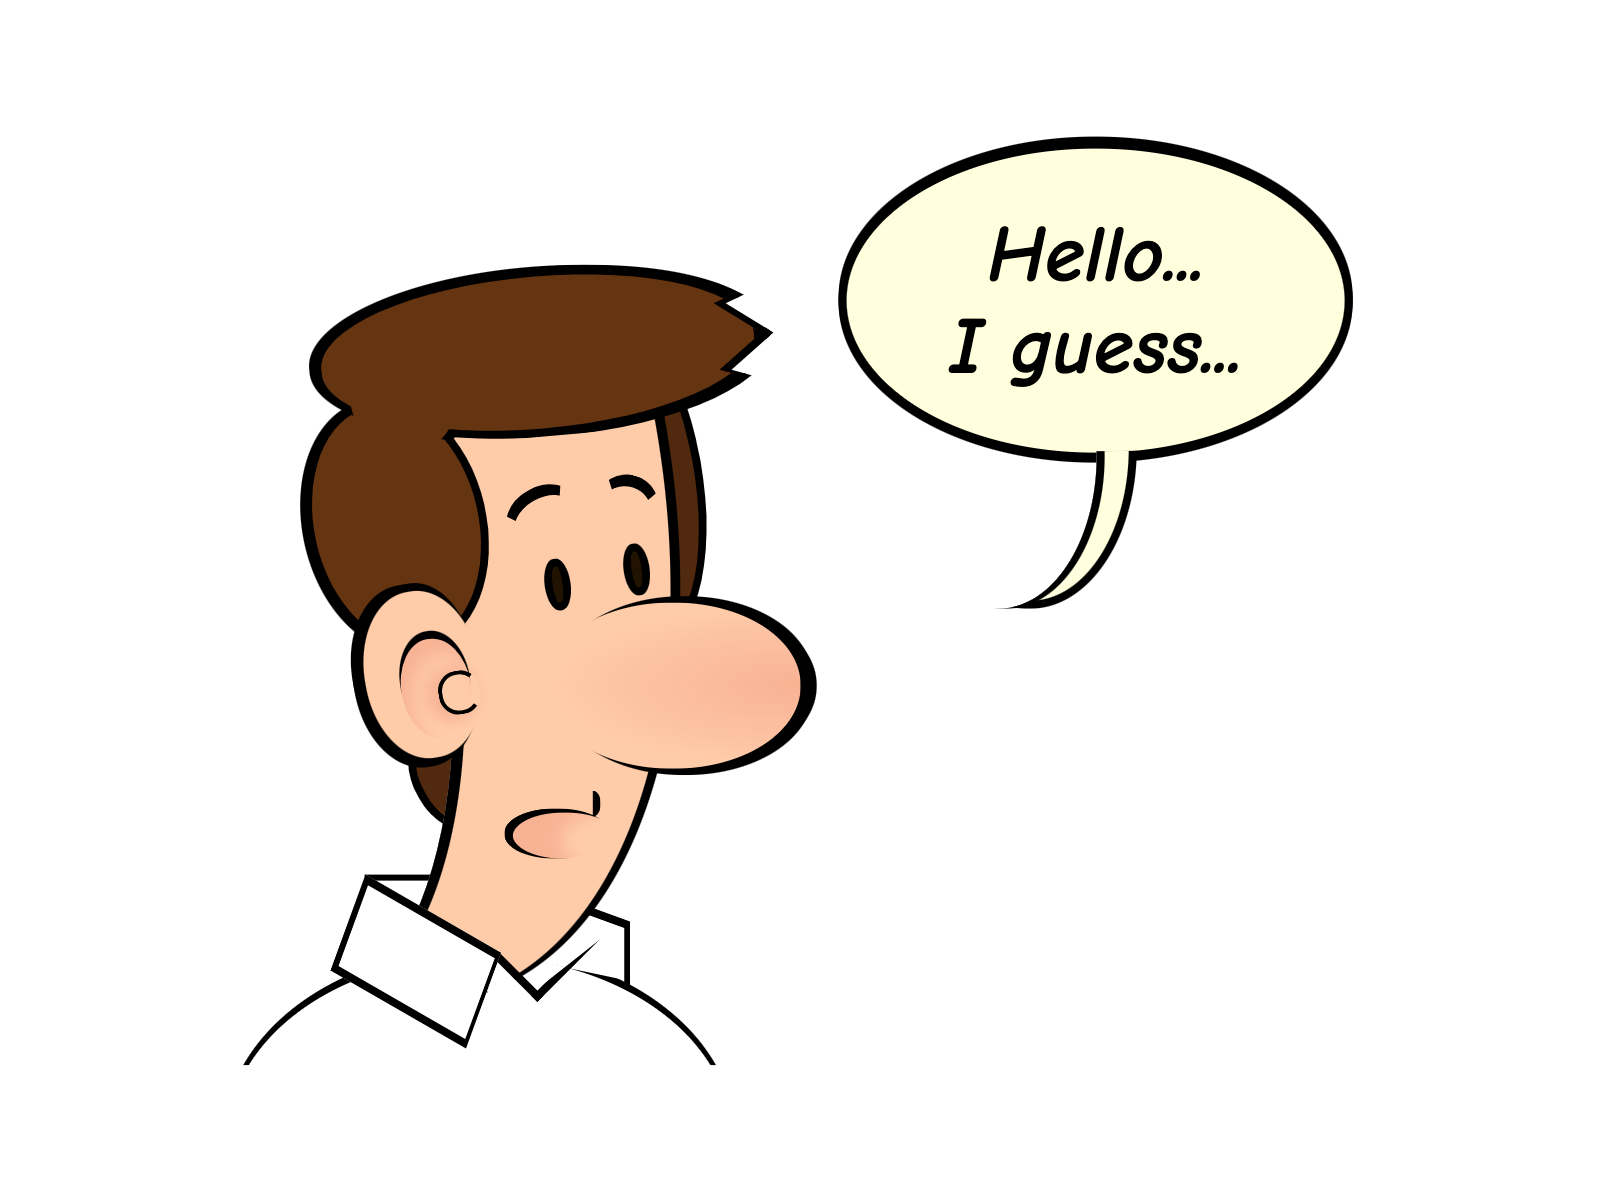 Cartoon showing a man with a speech bubble with the text "Hello... I guess..."